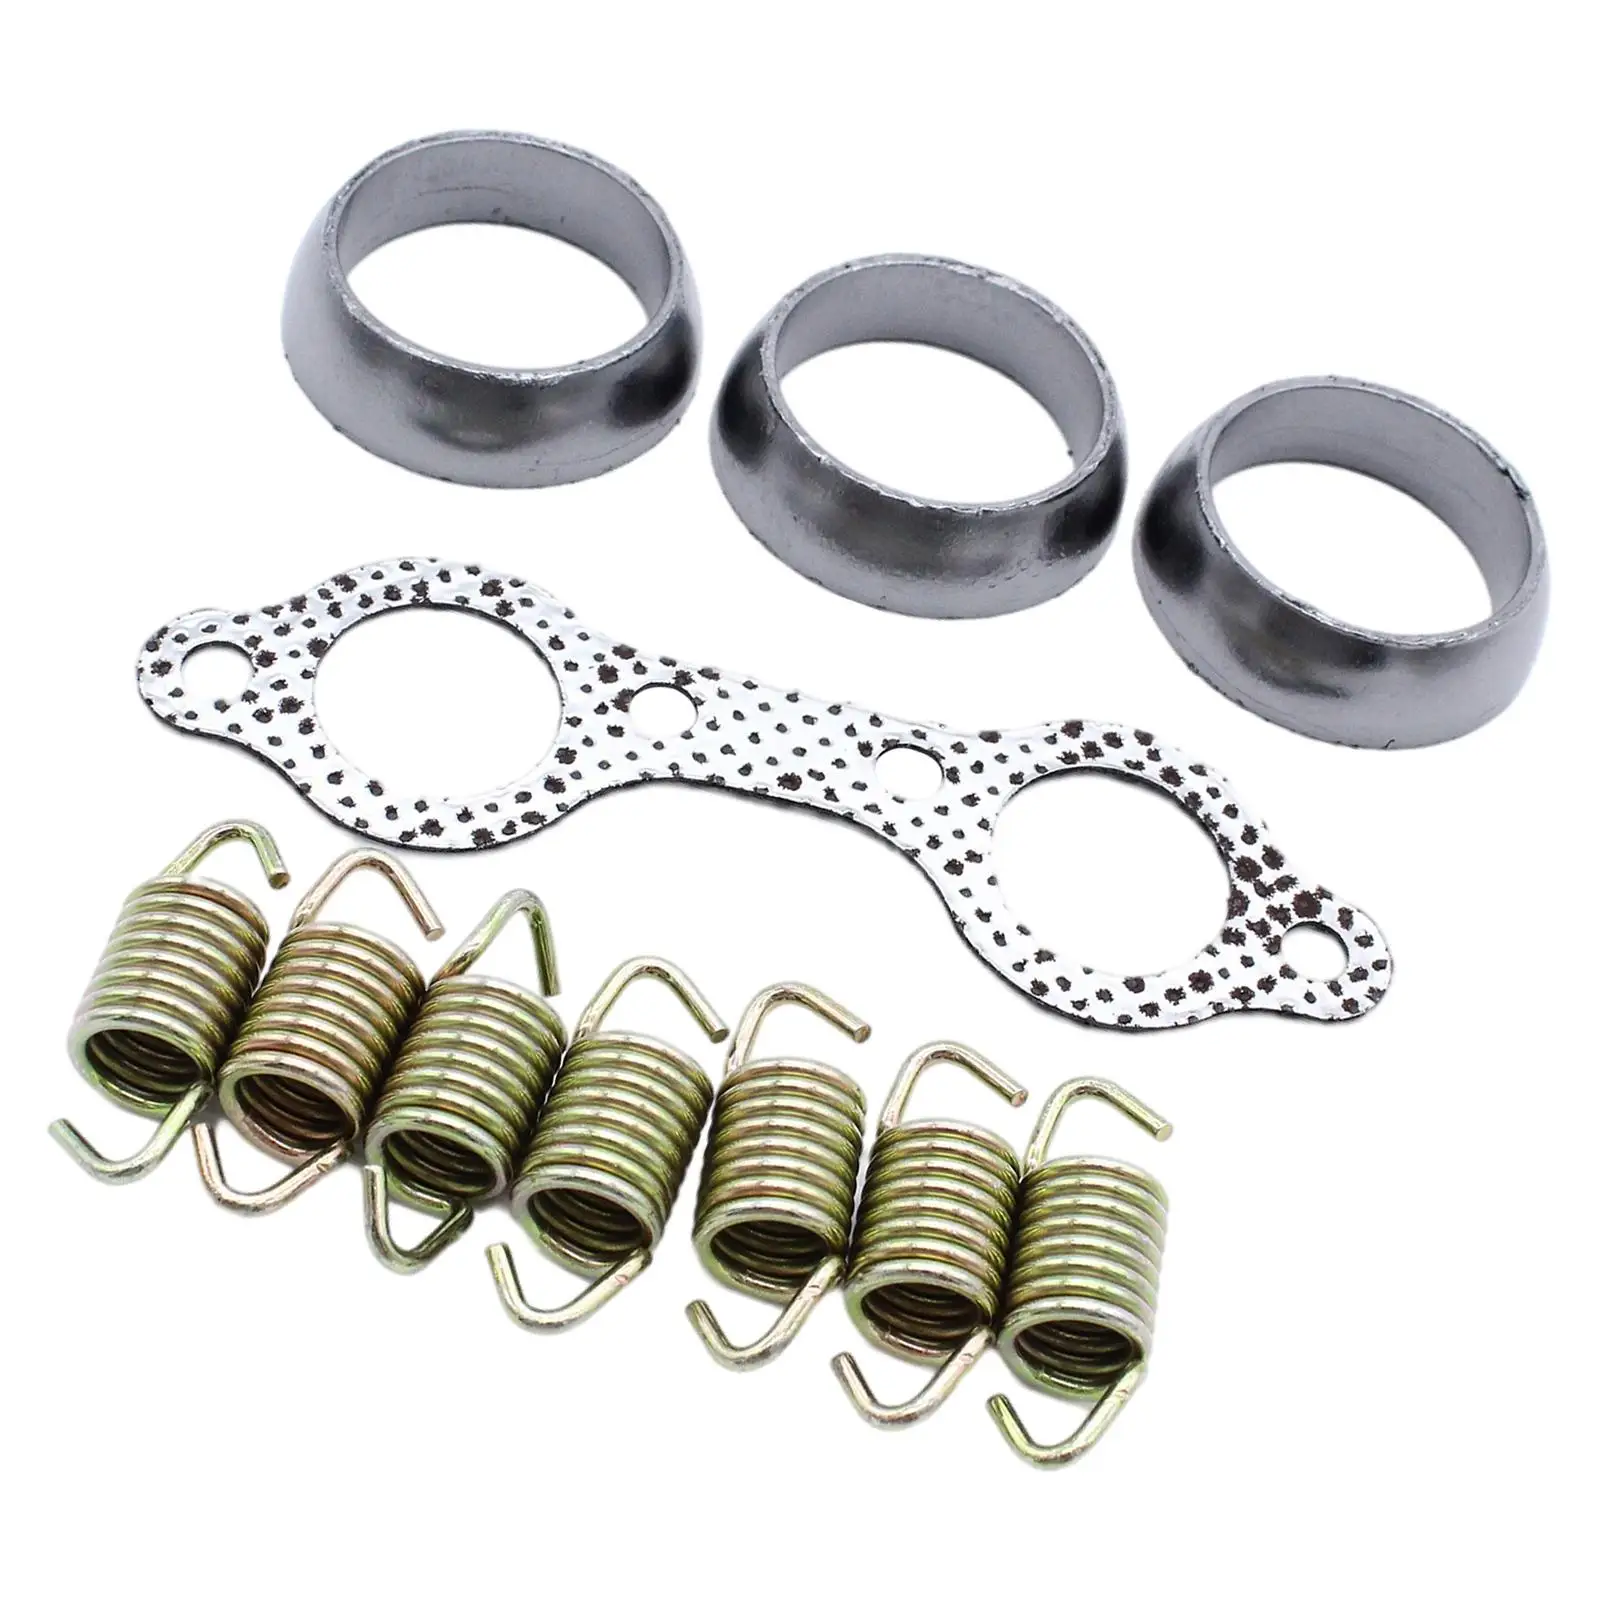 Exhaust   Gasket Seal Sping  for  700 2010-12 Exhaust Gasket Set 5243518,7041789,7041804